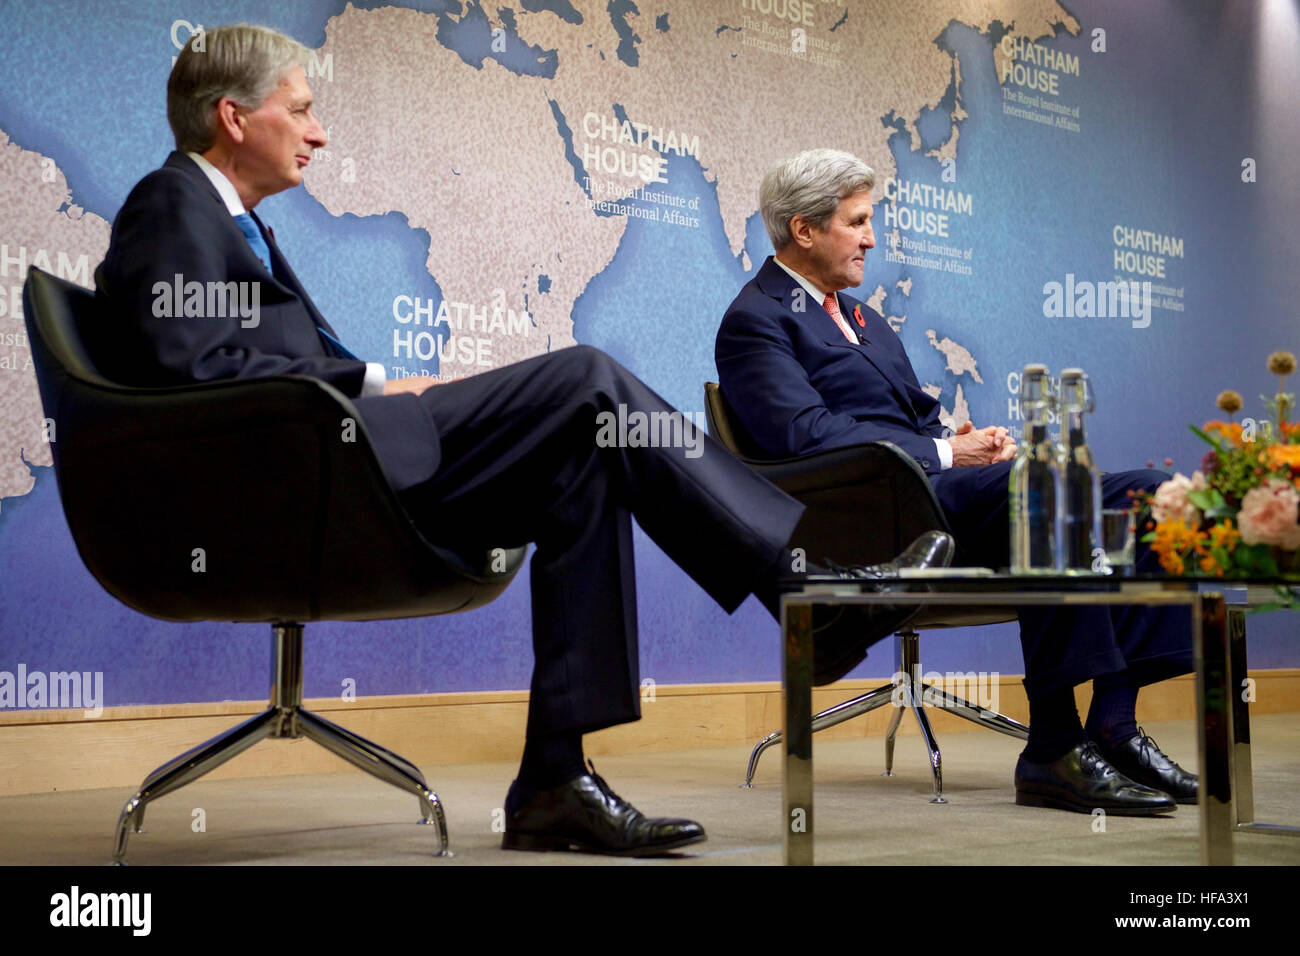 U.S. Secretary of State John Kerry listens as his former counterpart, British Chancellor of the Exchequer Philip Hammond, makes remarks before the Secretary and Iranian Foreign Minister Javad Zarif received the Chatham House Prize from the famed international think-tank in London, U.K., on October 31, 2016. Stock Photo